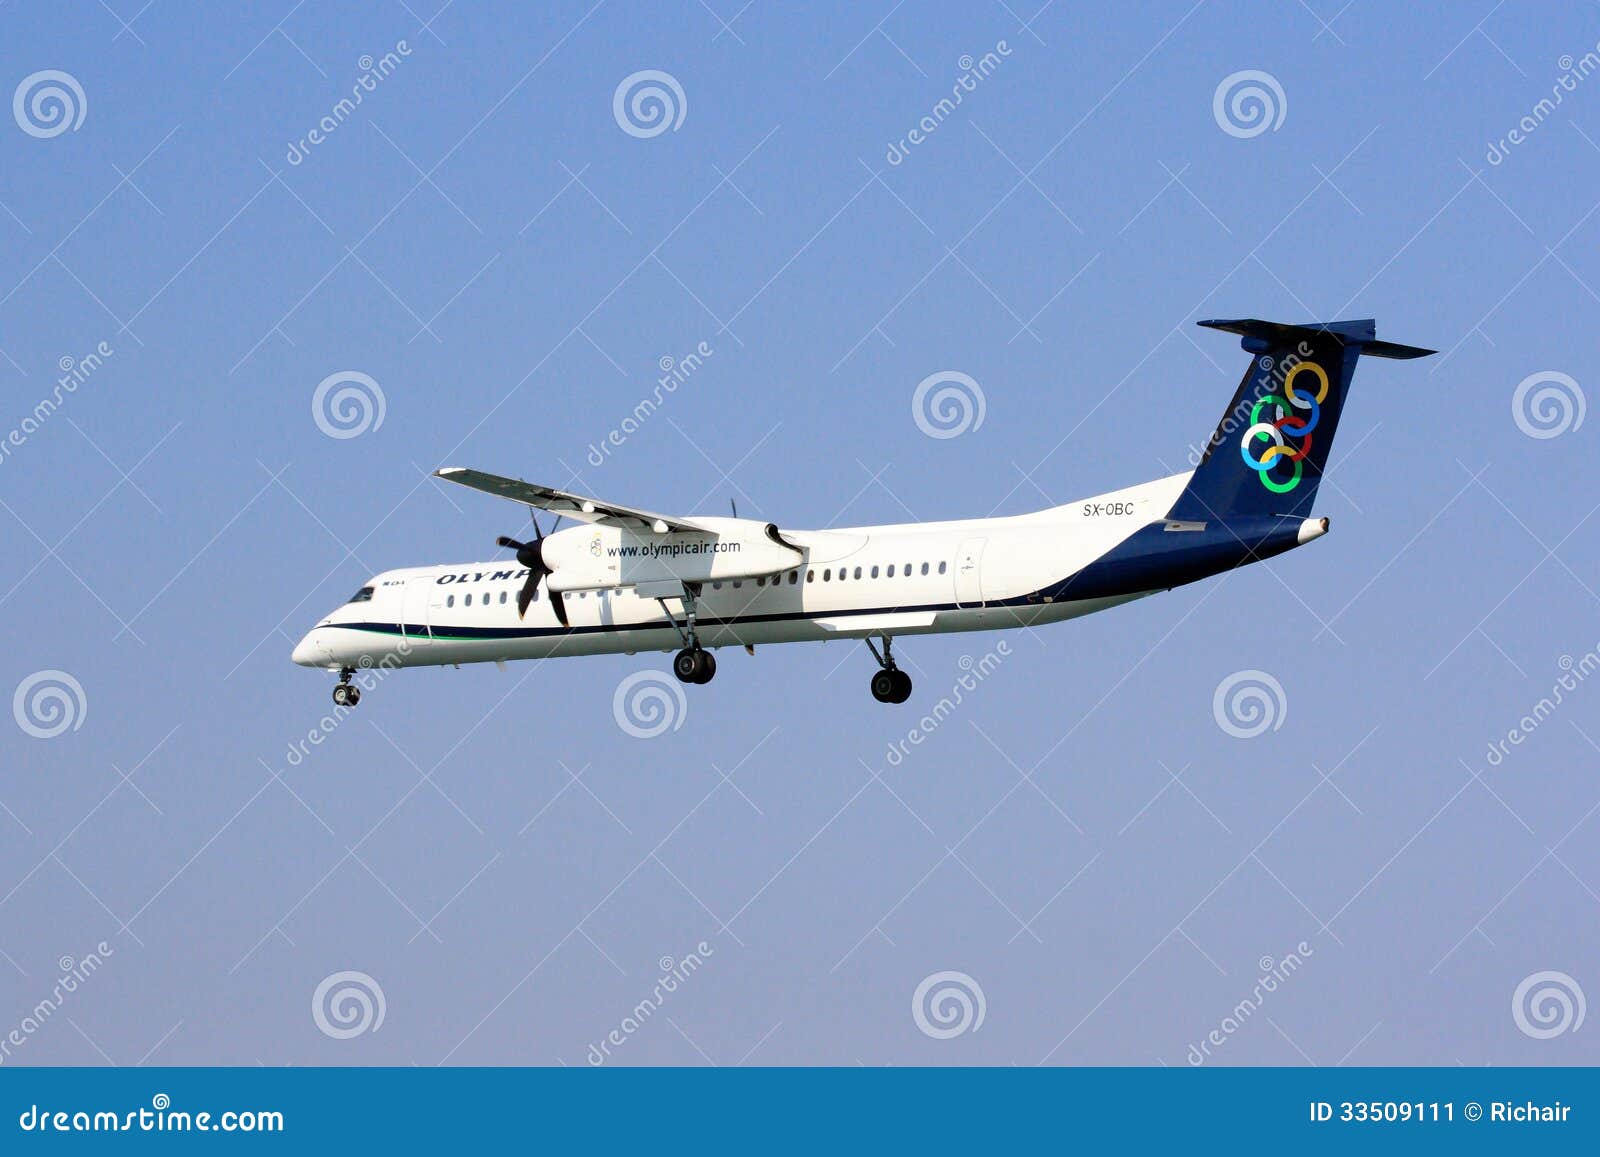 Olympic Air Q400 on Approach Editorial Photo - Image arrive, dash: 33509111